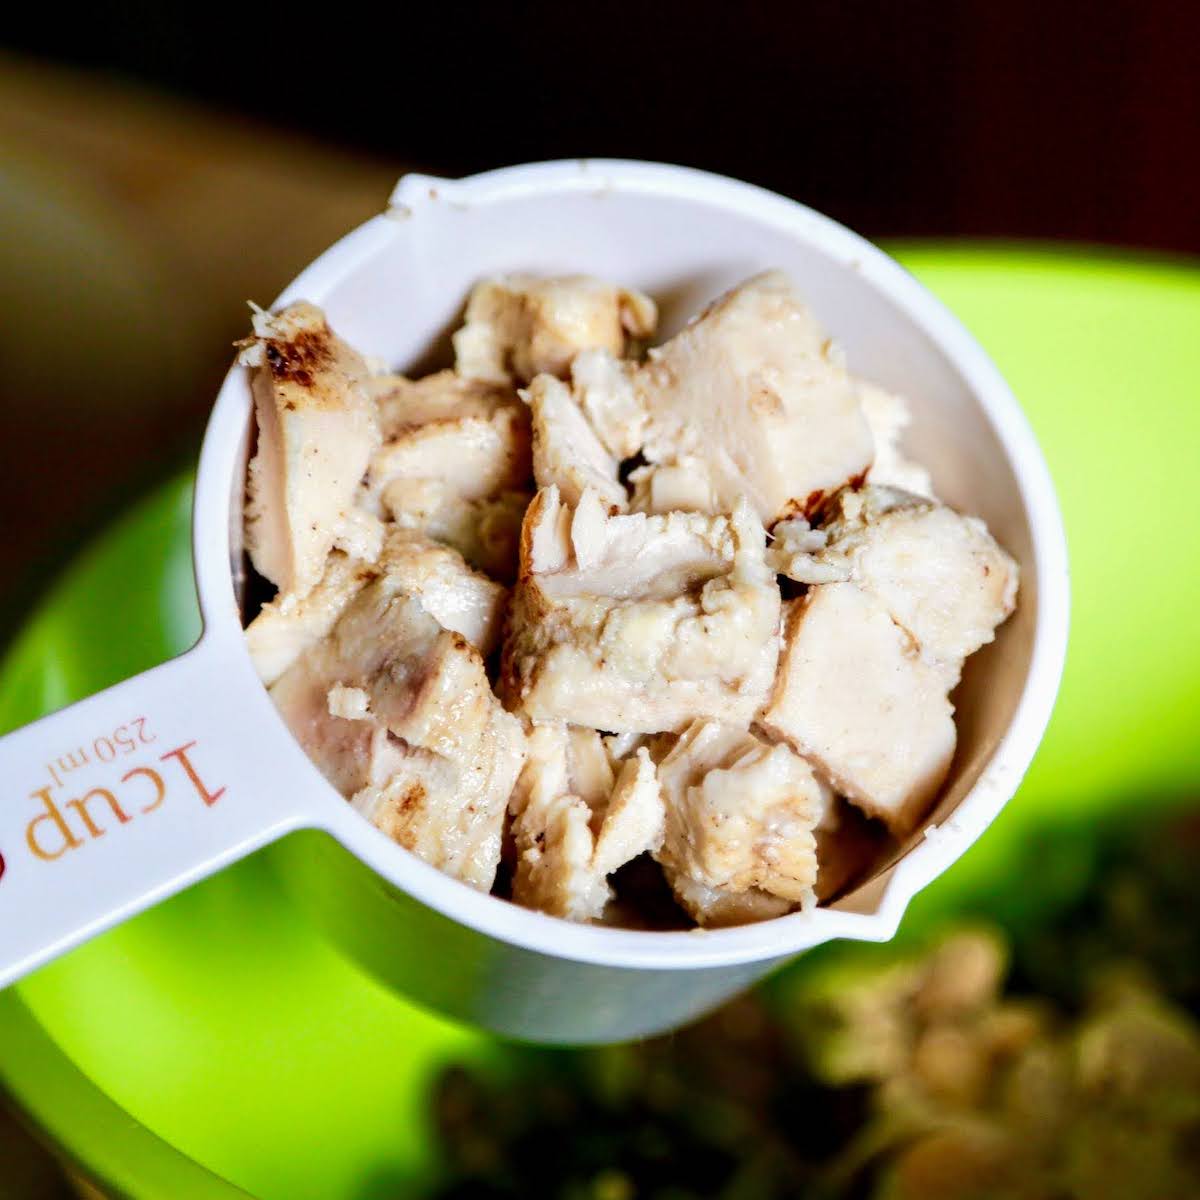 ¾ cup filled with cut cooked chicken